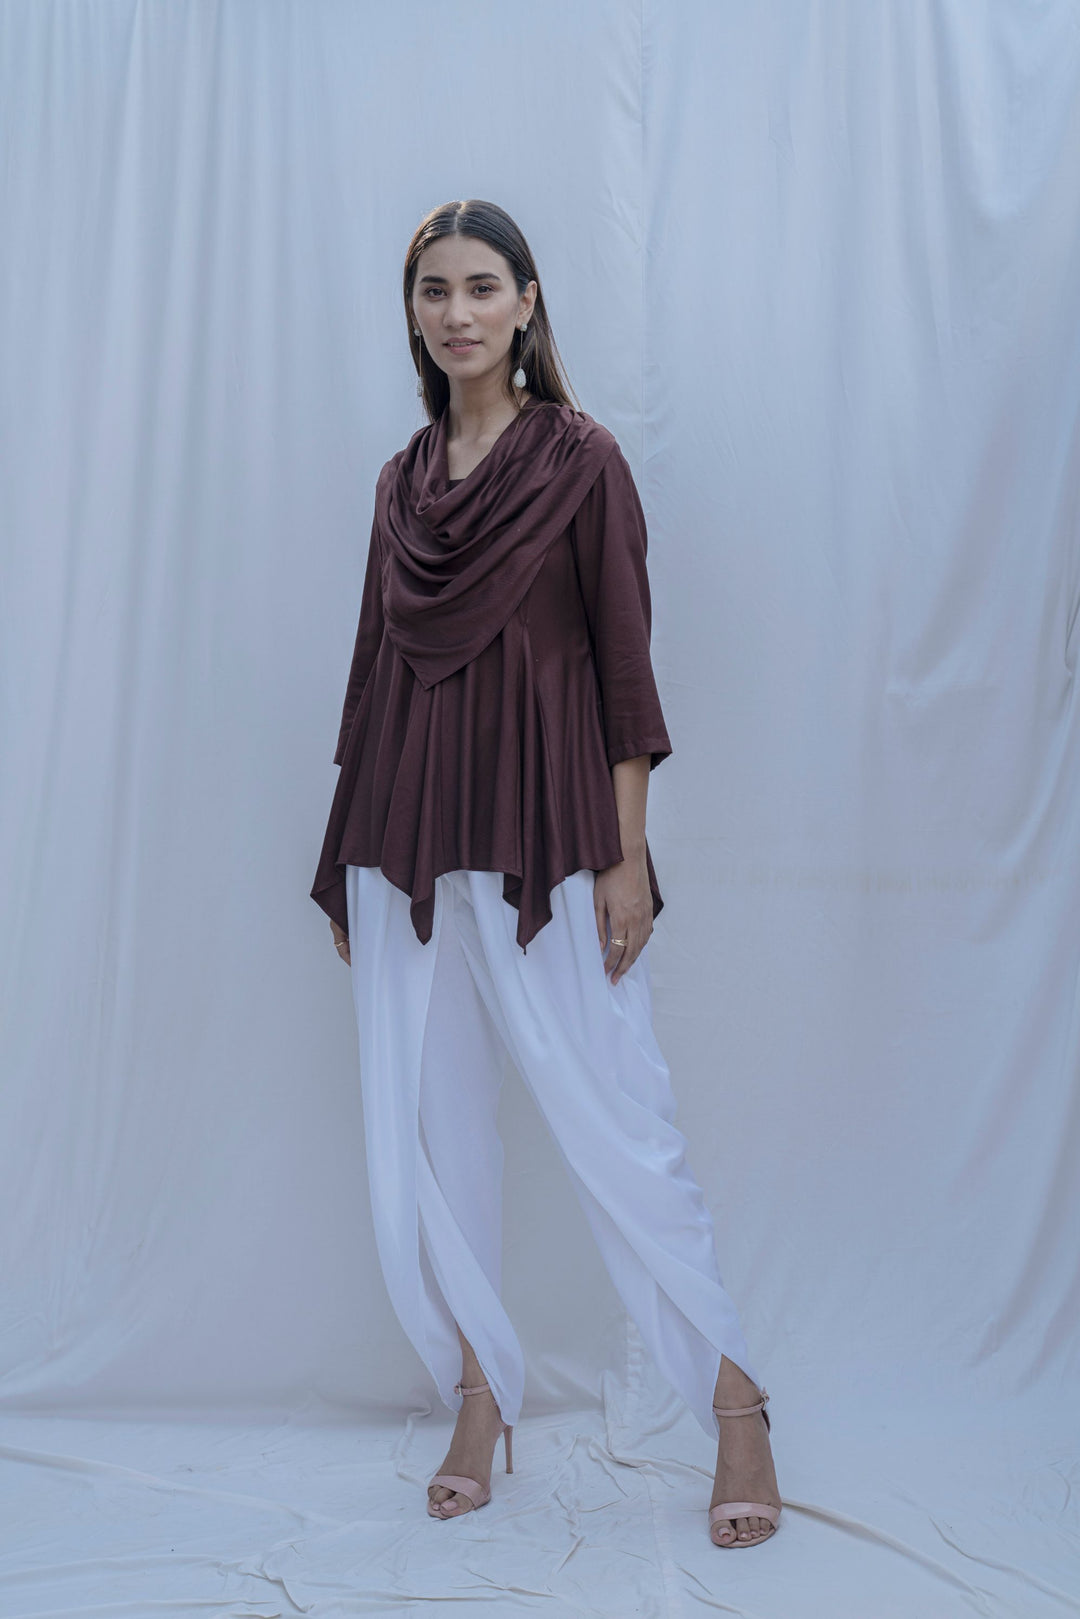 Dream Cowl Top in Brown  and Tulip Dhoti in White - Set